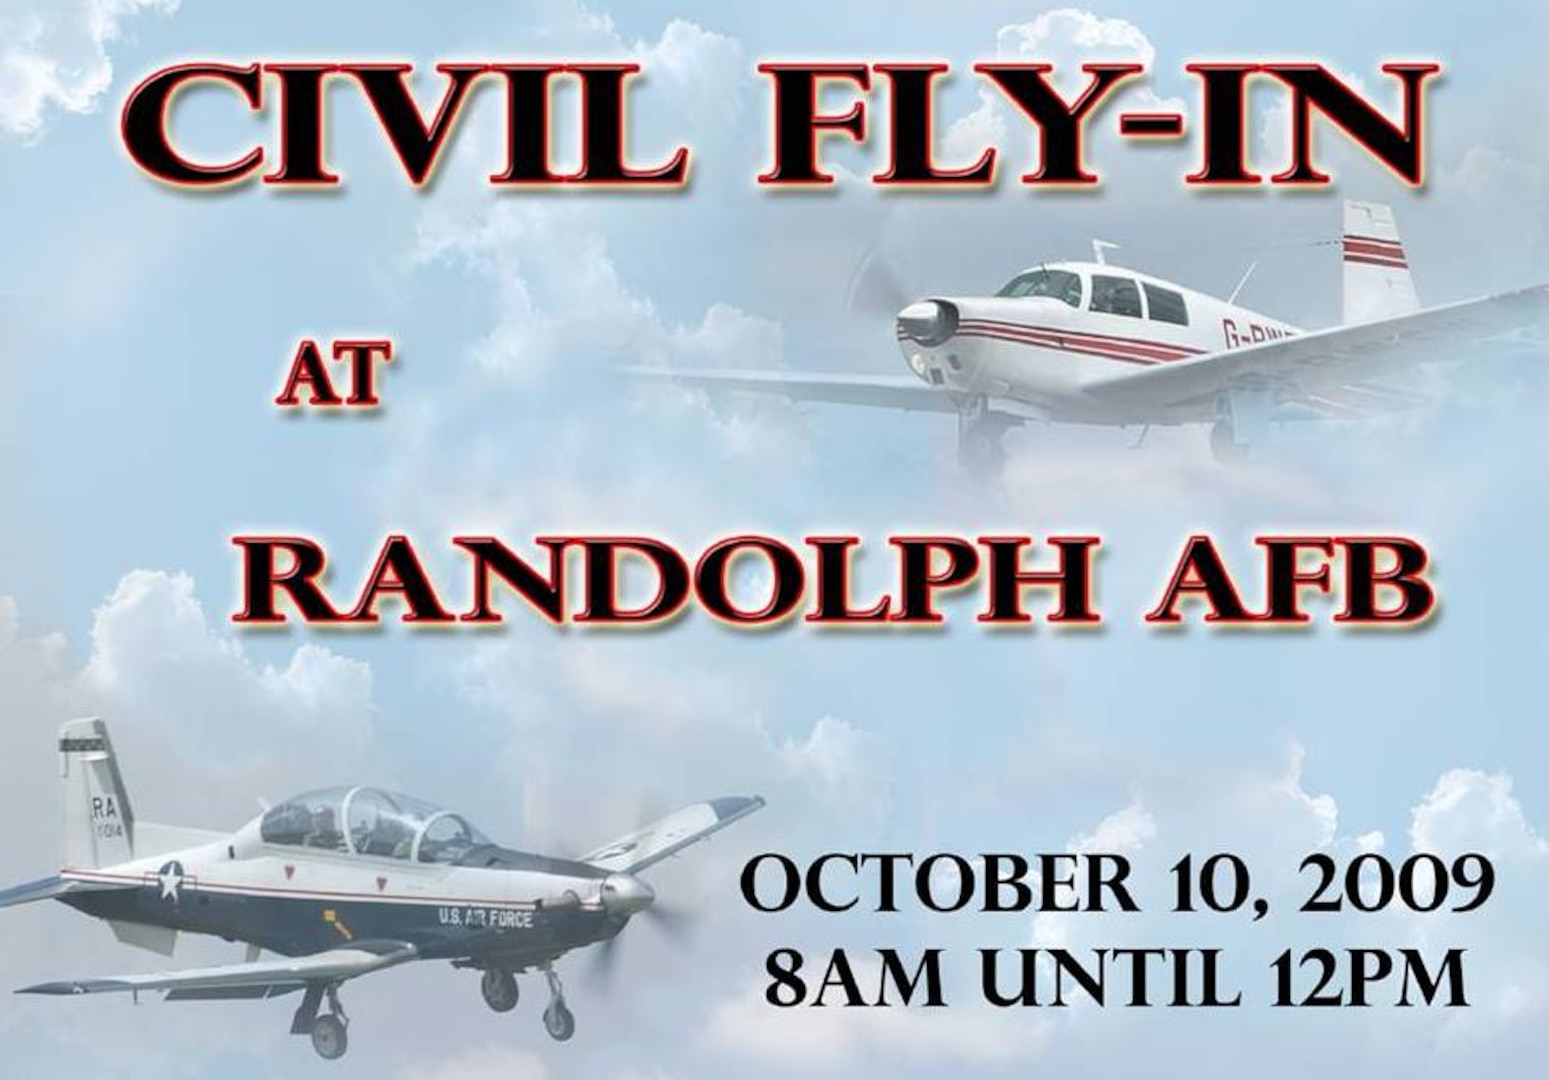 Randolph Air Force Base officials invite general aviation pilots to fly to the airfield here and participate in a Civil Fly-In the base will host Oct. 10 from 8 a.m. to noon on the flight line. (Graphic by Javier Garcia)